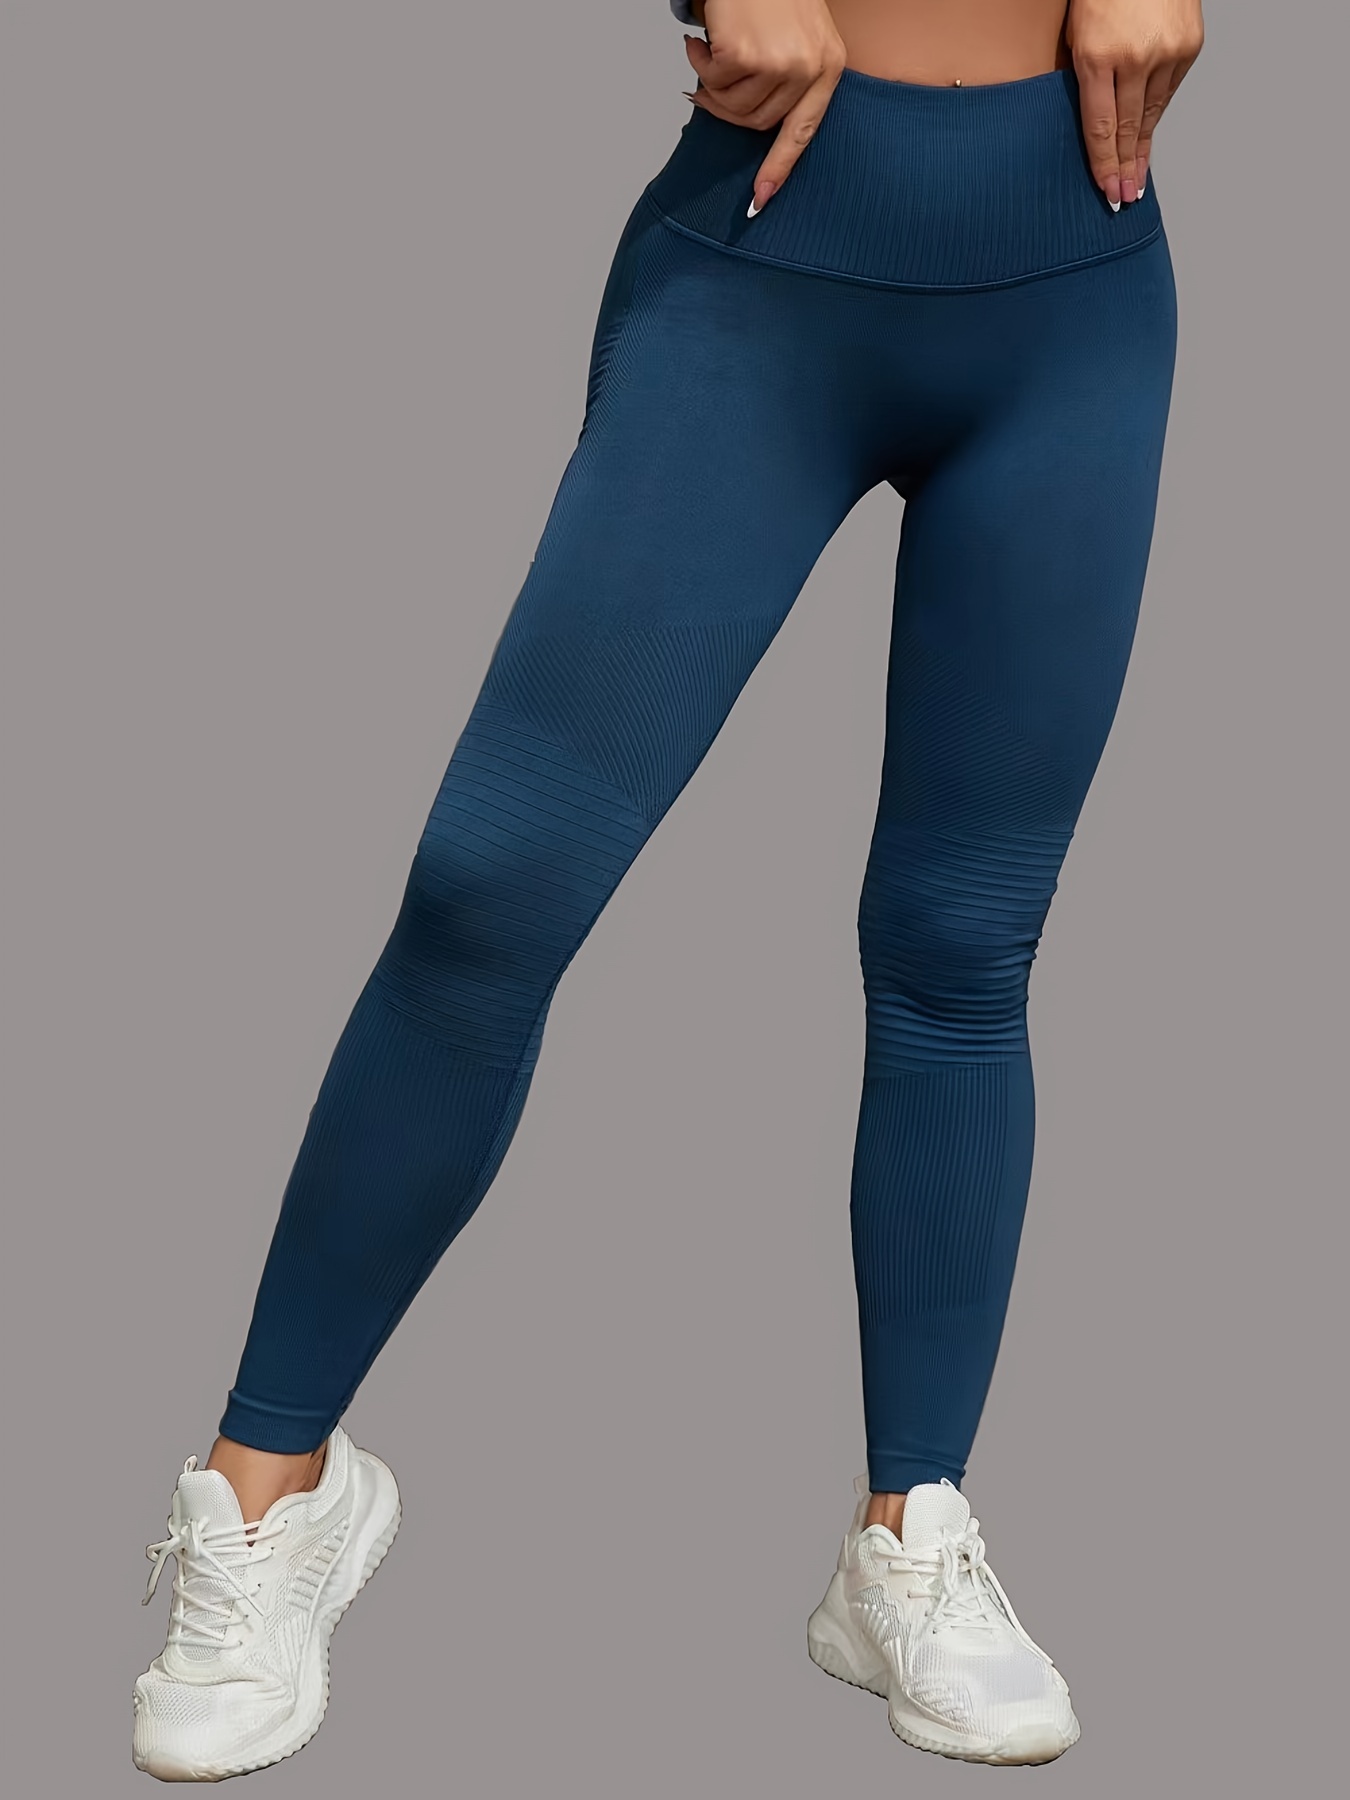 Comfort Lady Leggings, hohe Taille, dehnbare Workout-Fitness